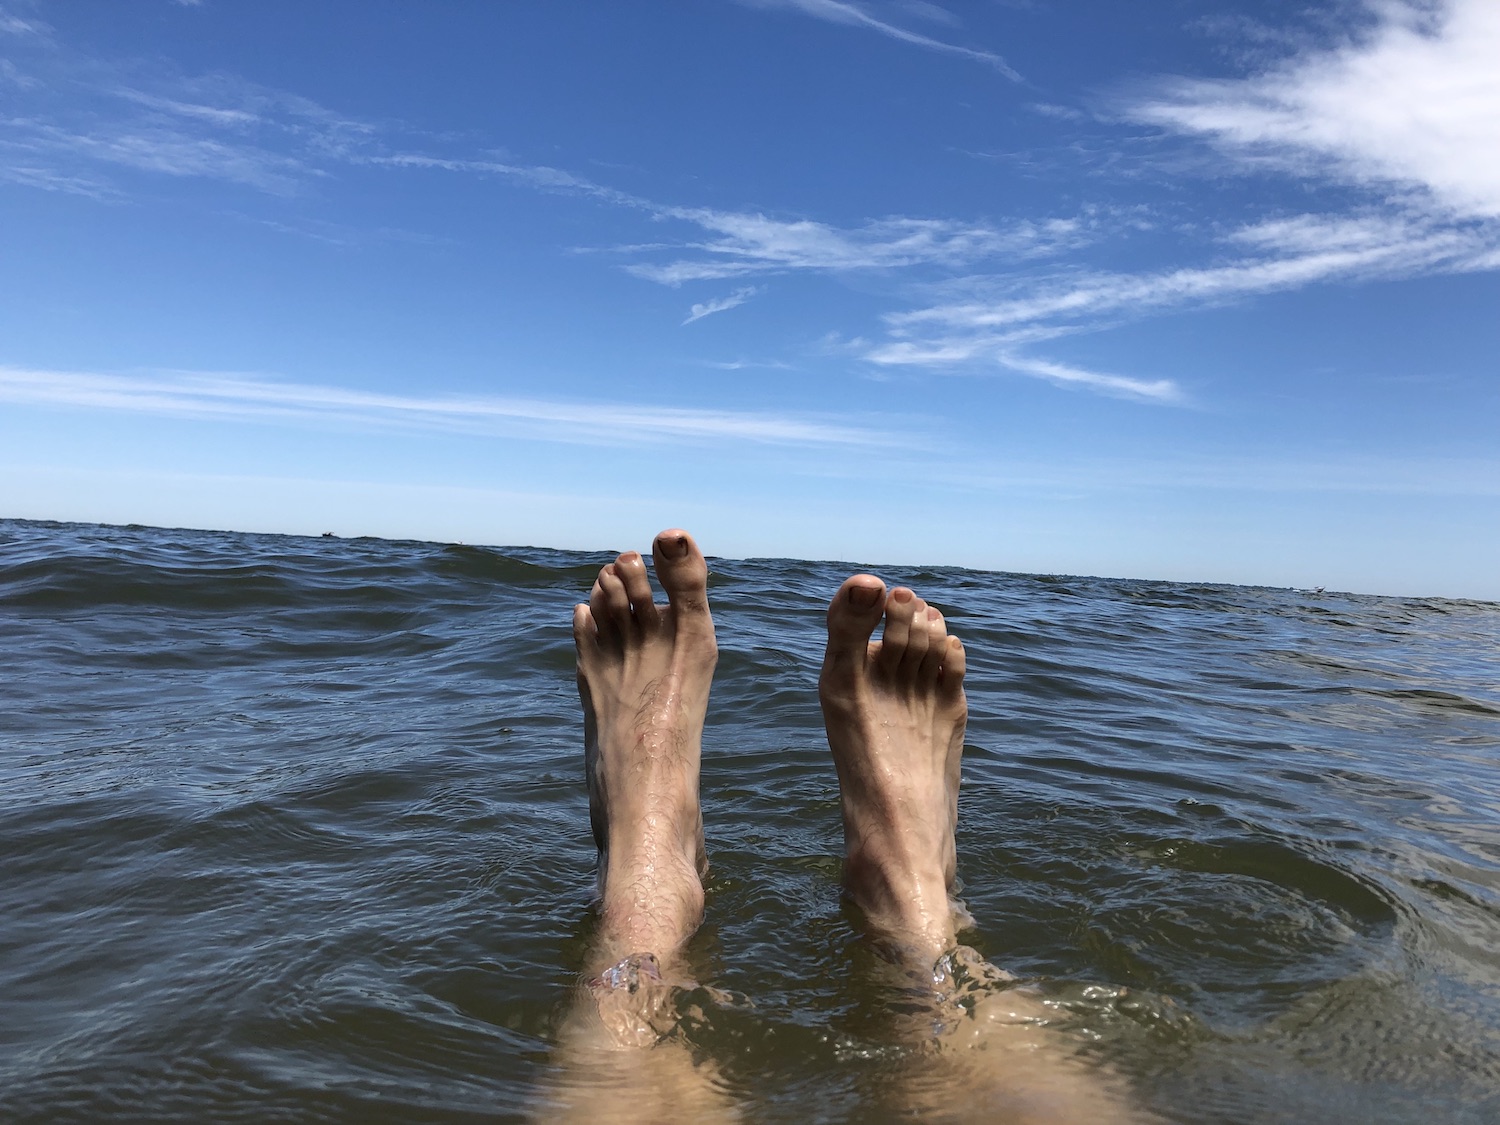 my feet in water-describe the image HERE for accessibility purposes